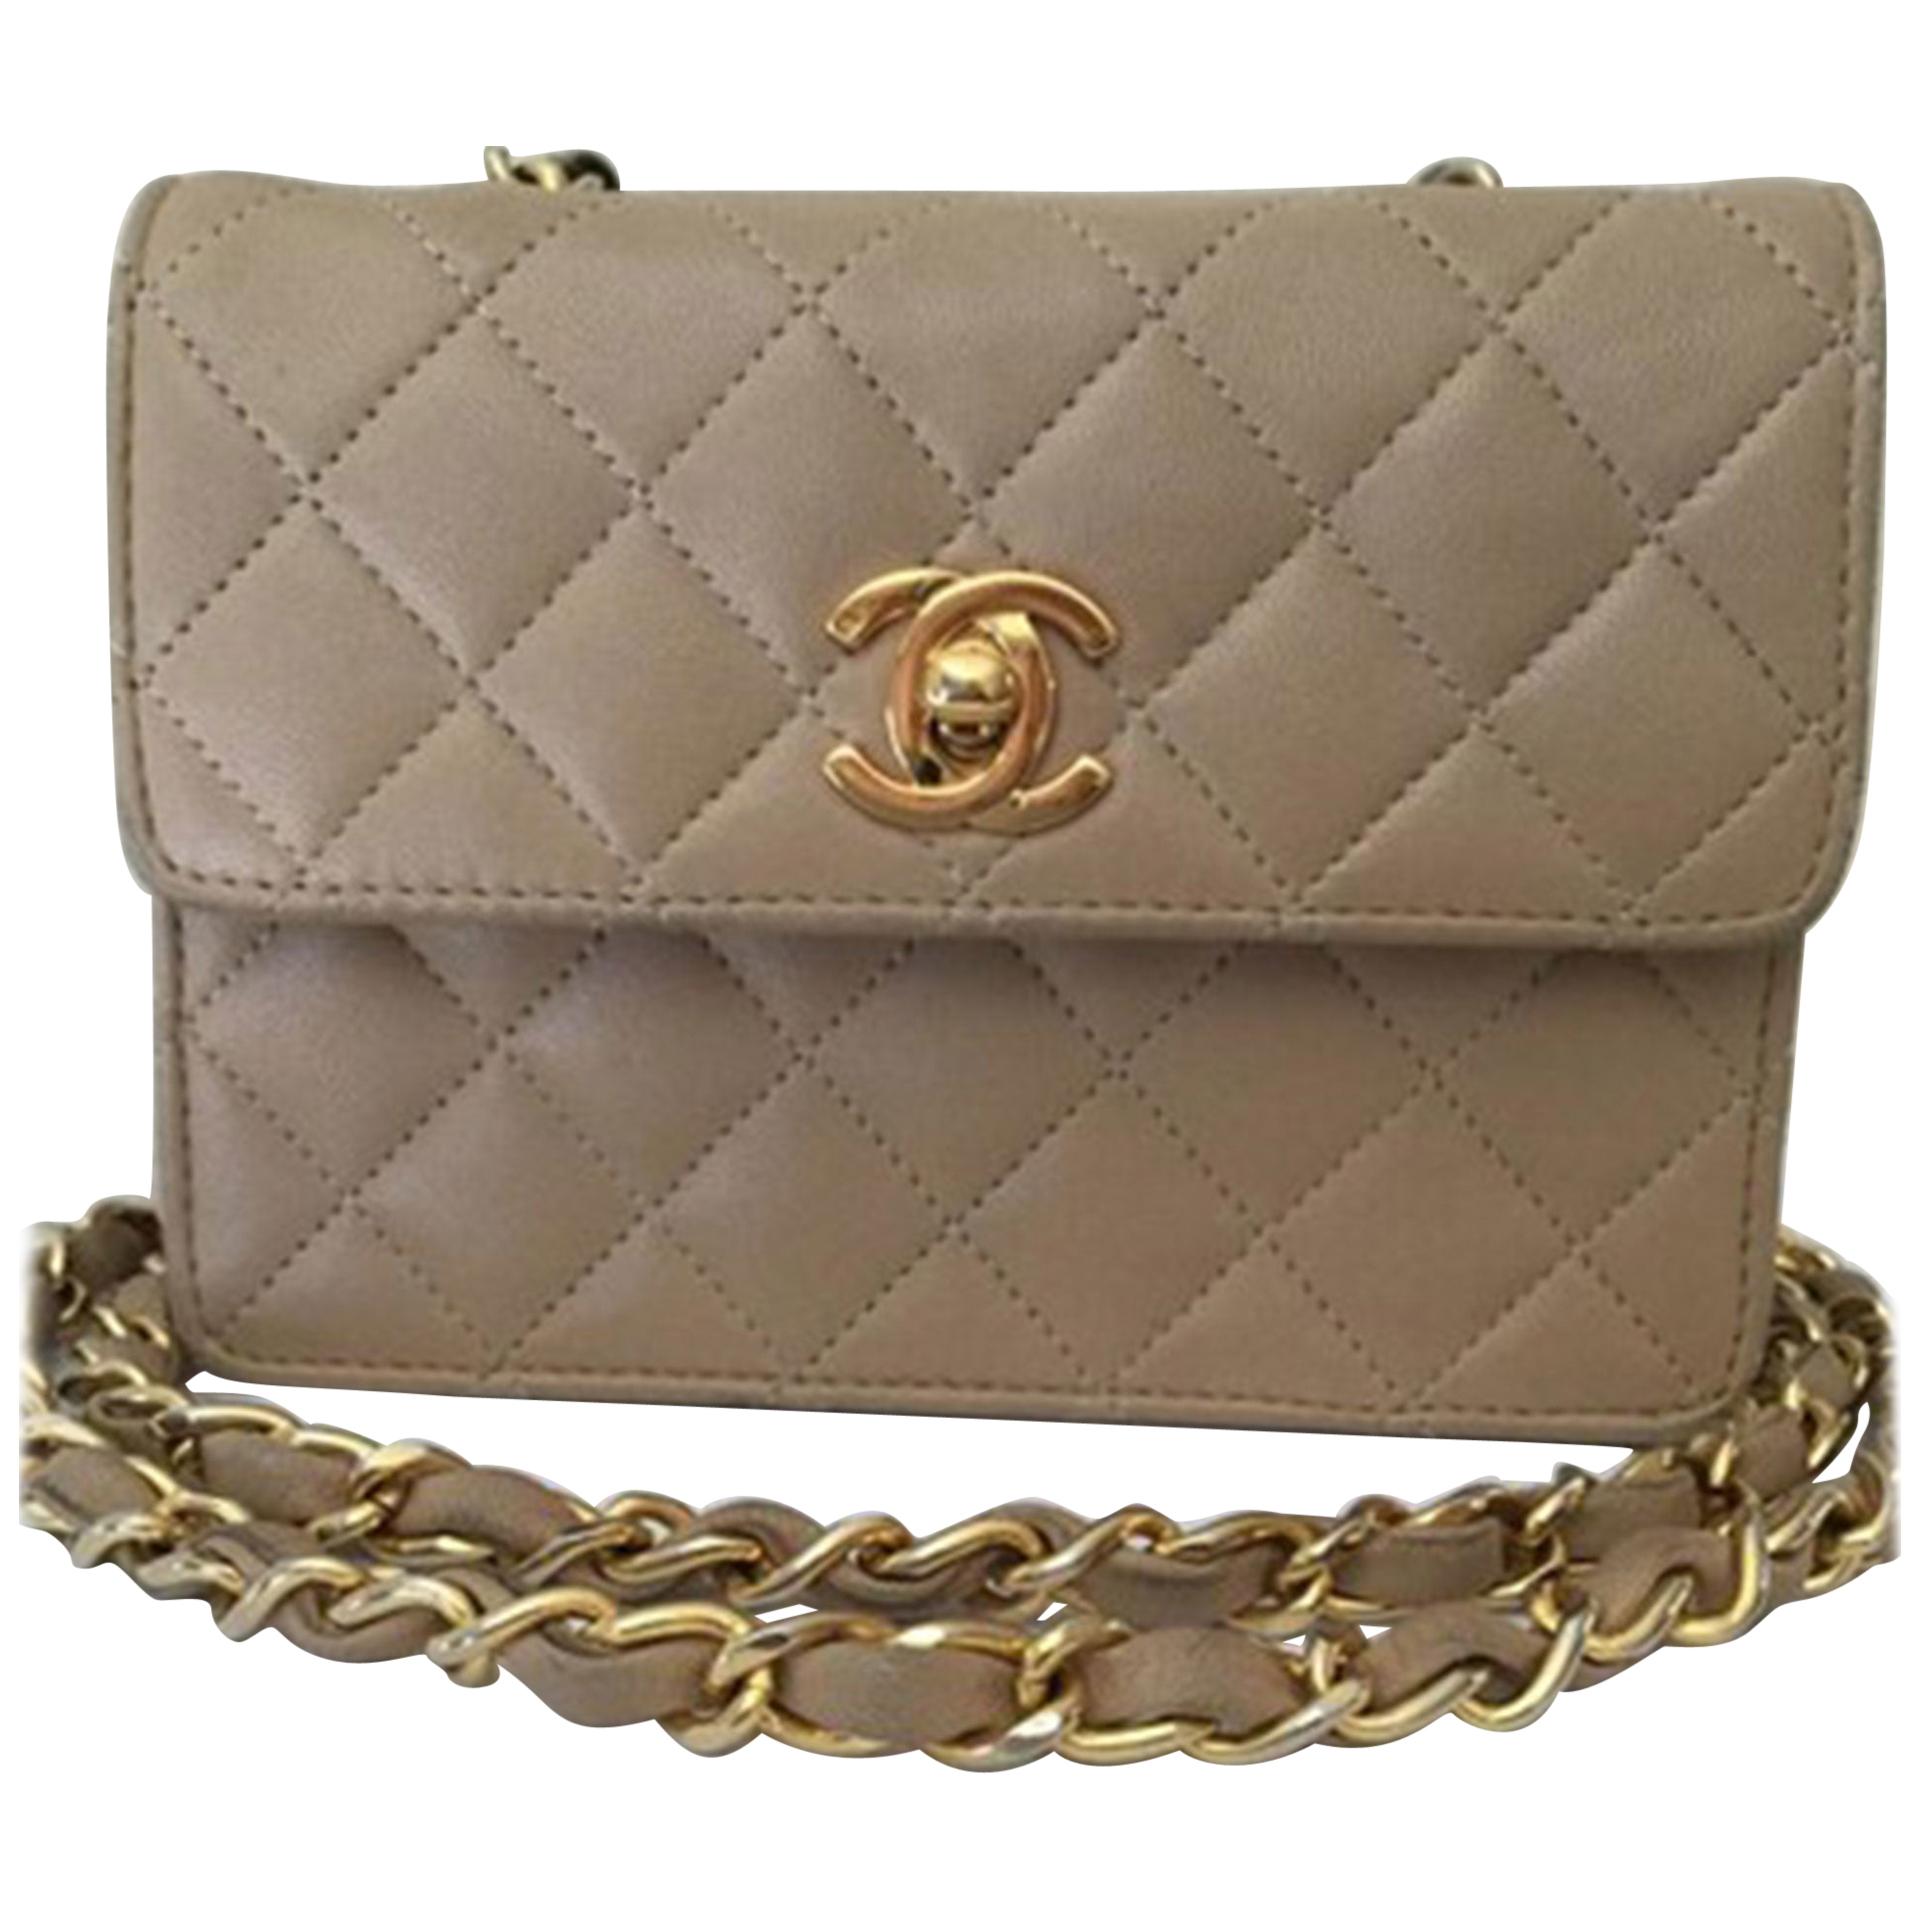 Chanel Micro Bag Necklace 2022 Collection